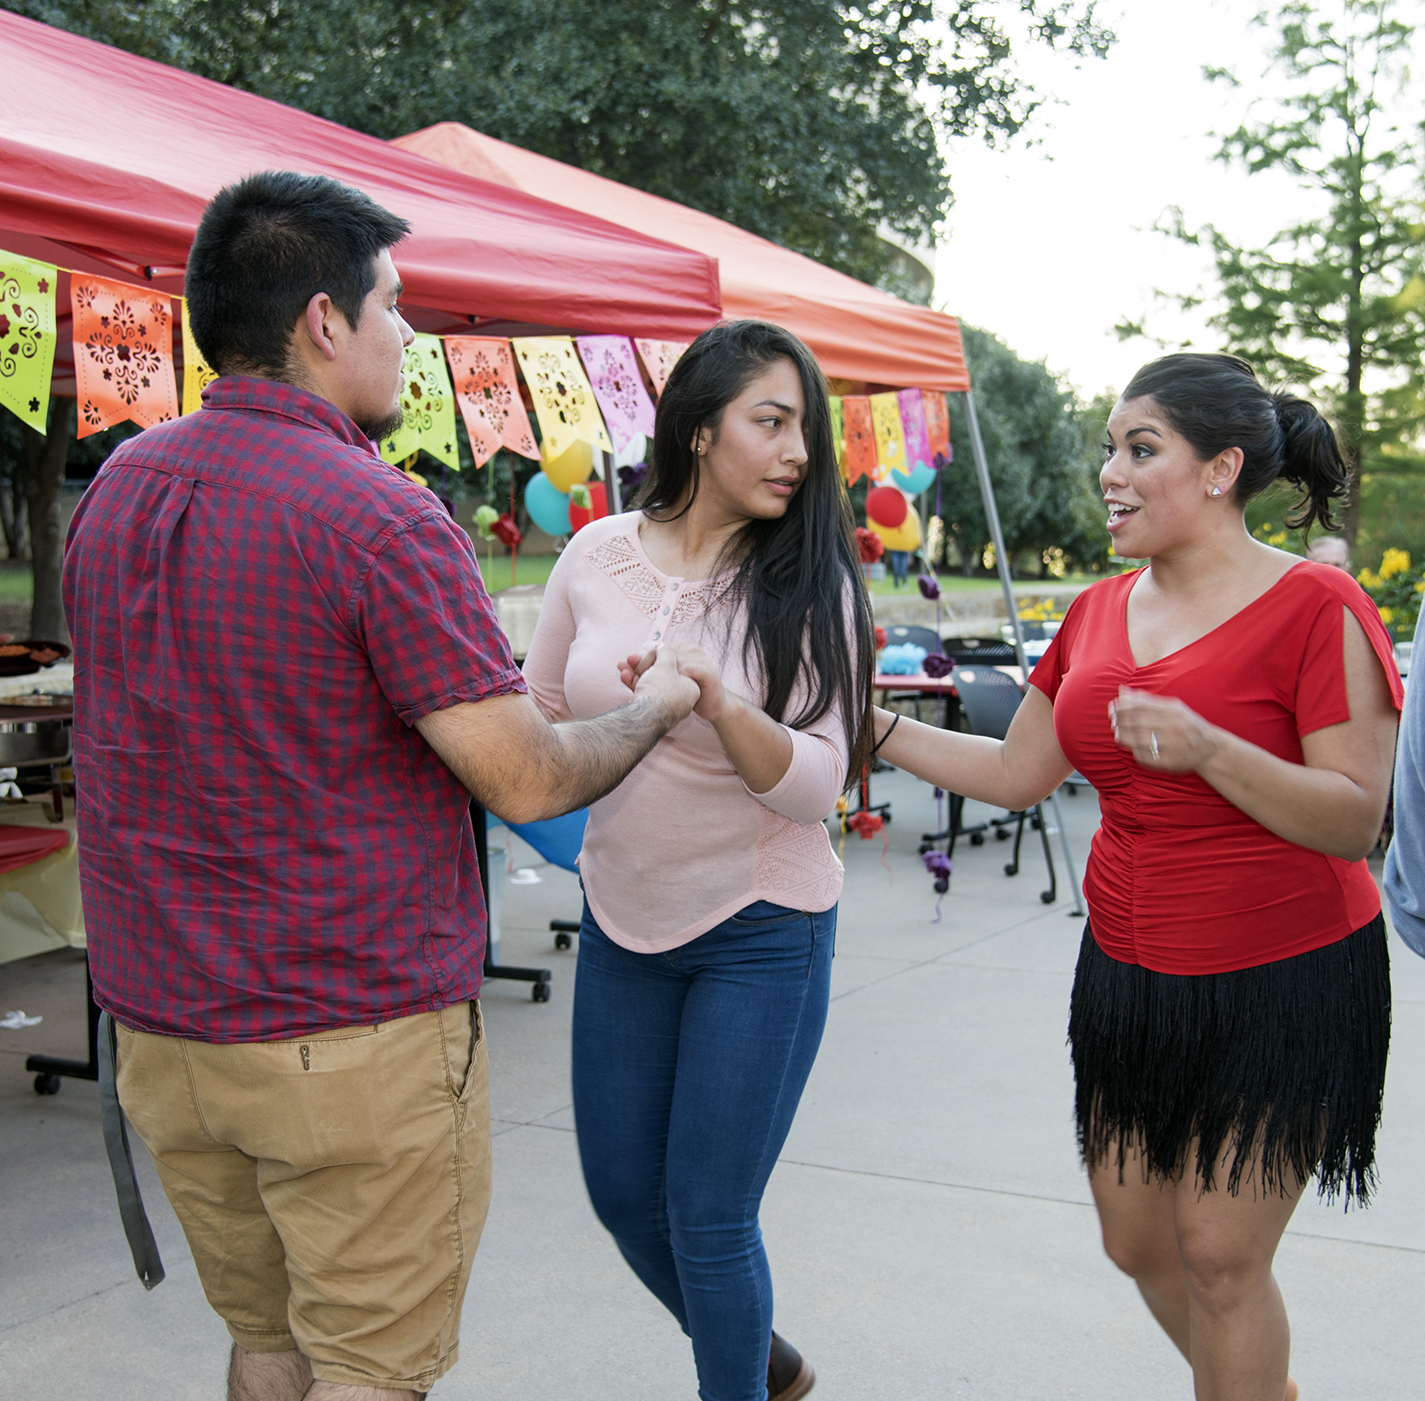 Stephanie Rivera helps TR students Adrian Jaure and Marcela Brochere learn the moves of salsa dancing during ¡Noche de Salsa! on the TR Plaza Oct. 12.